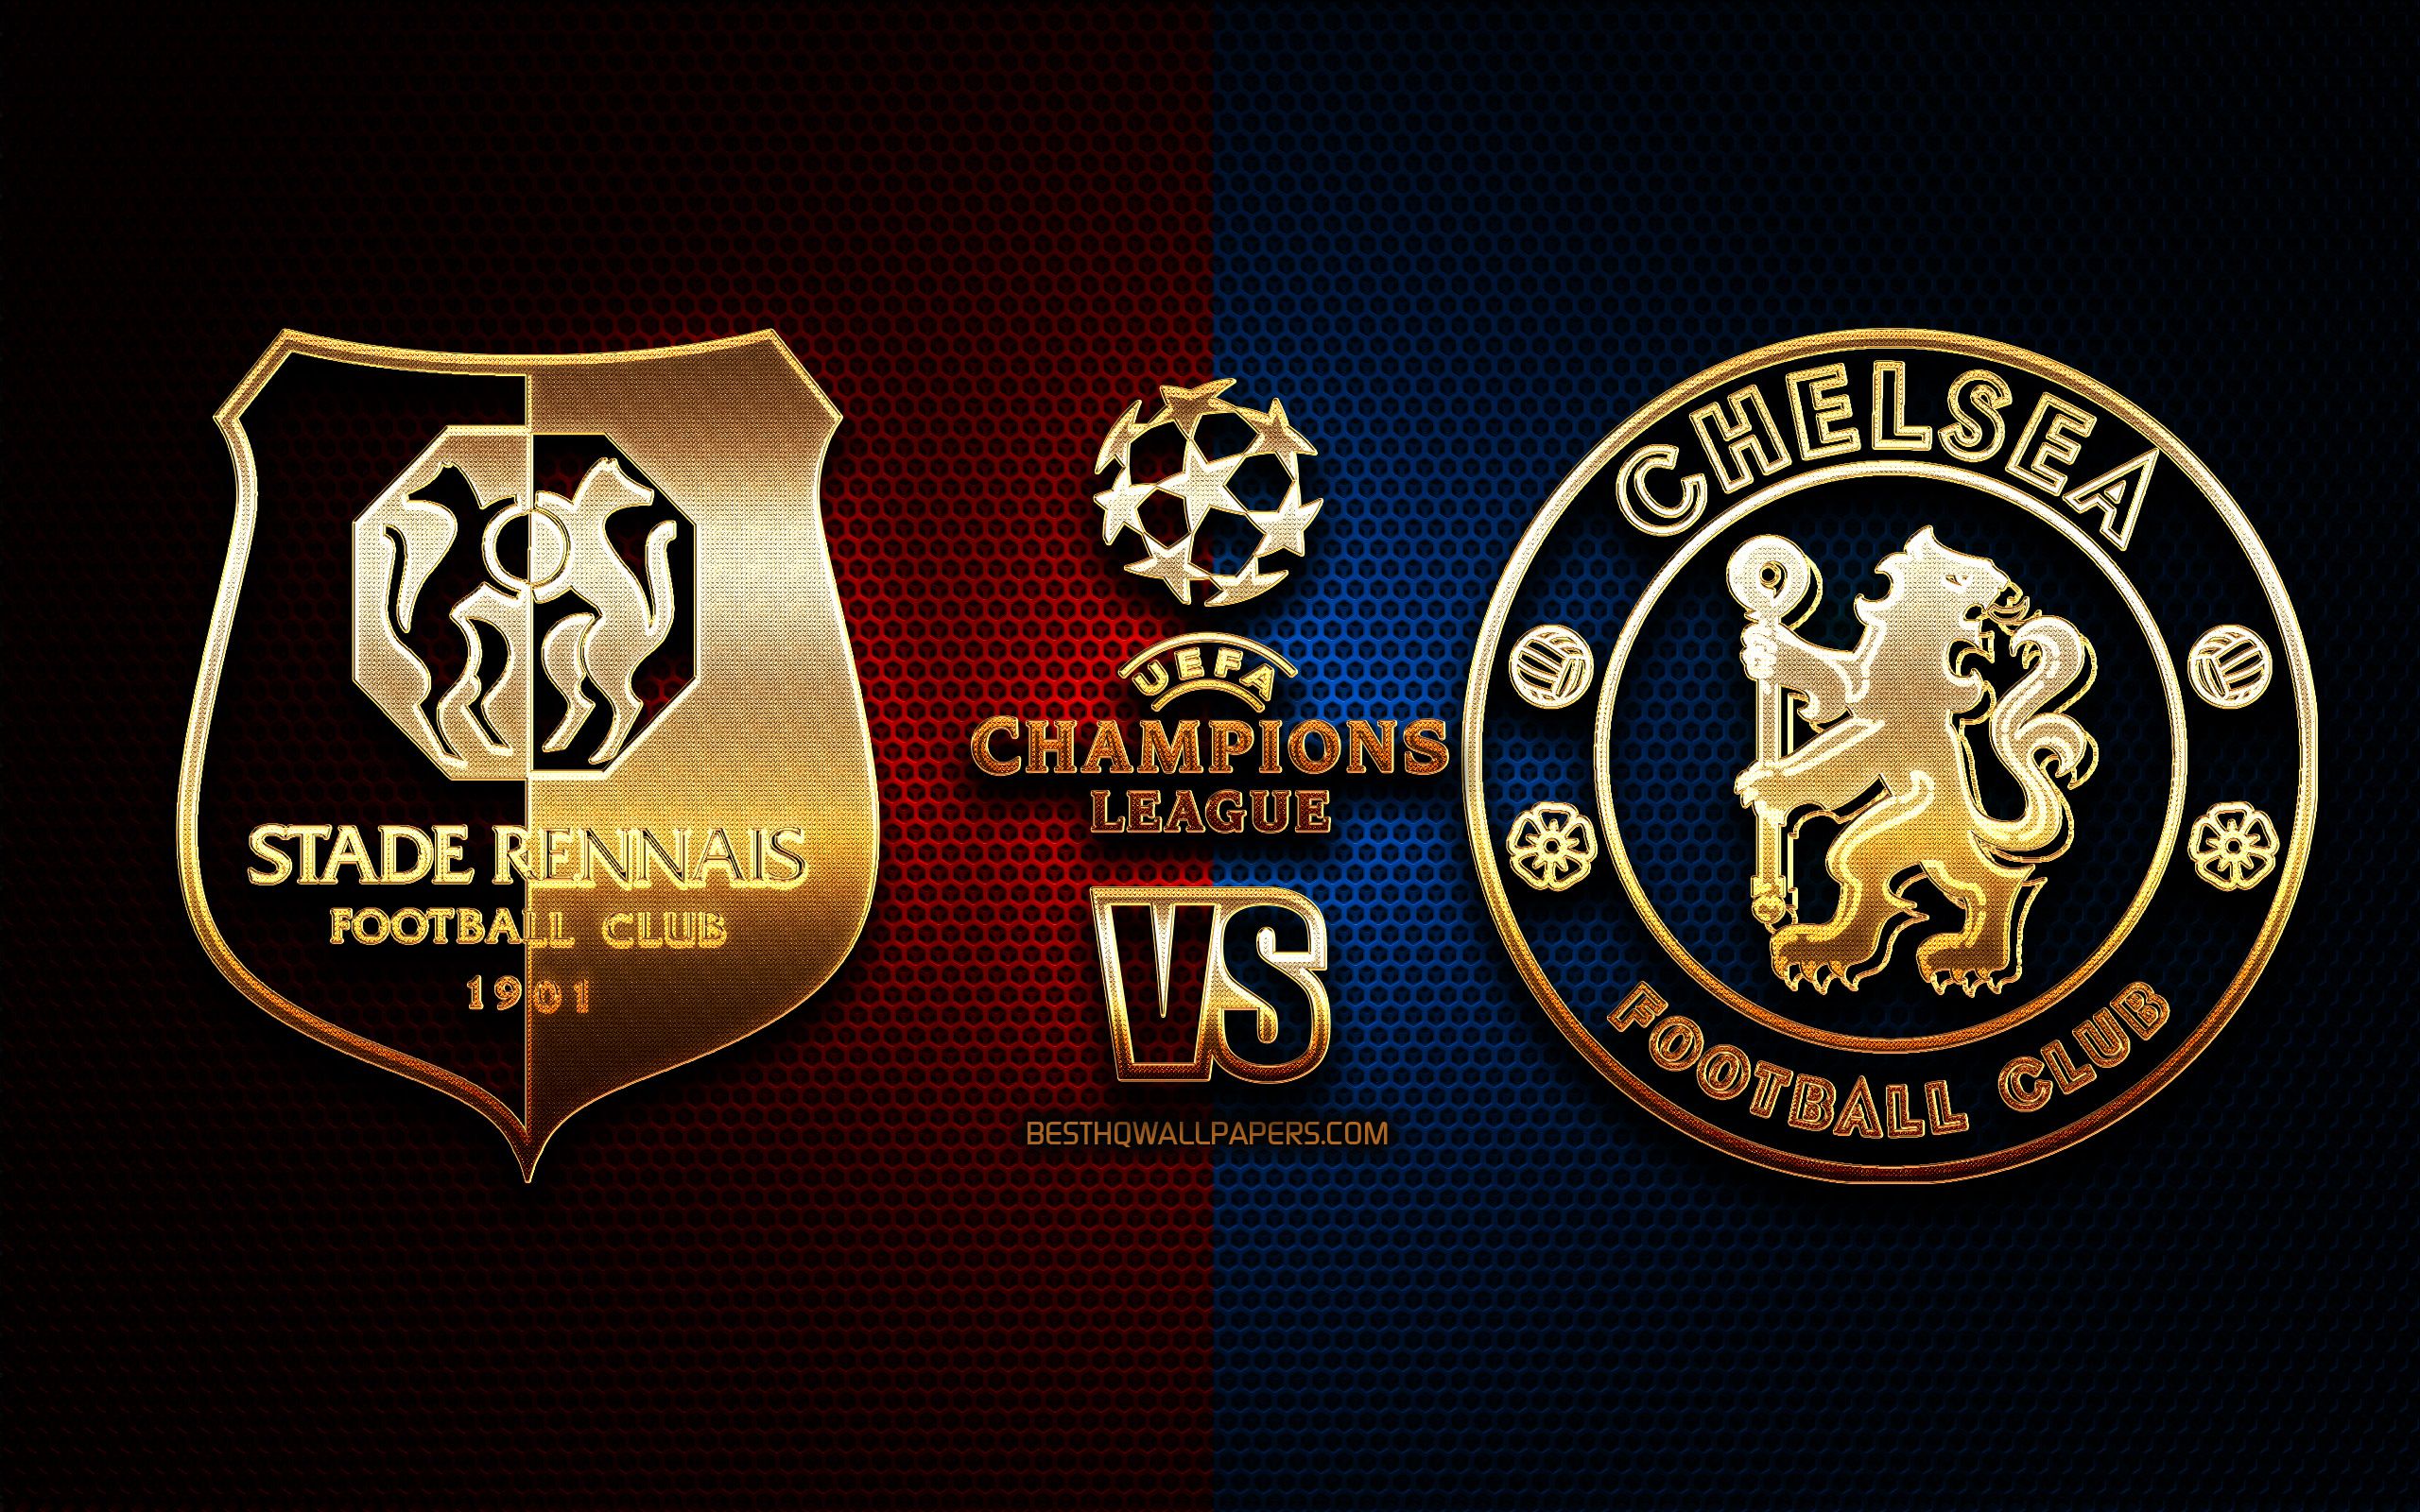 Champions League Chelsea Wallpaper 2021 / Redirecting to /post/384342